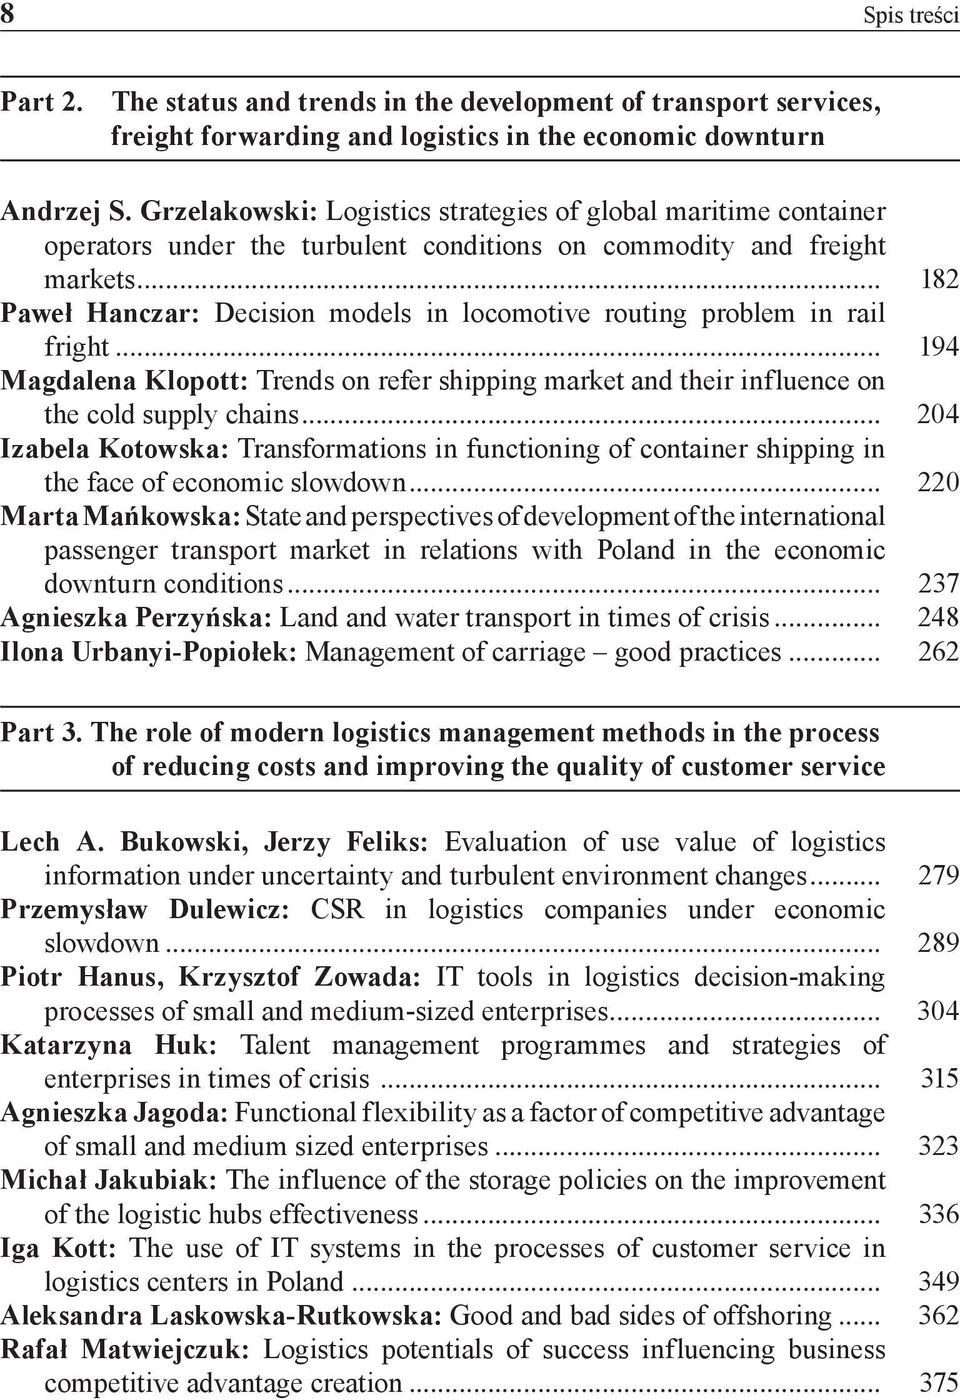 .. 182 Paweł Hanczar: Decision models in locomotive routing problem in rail fright... 194 Magdalena Klopott: Trends on refer shipping market and their influence on the cold supply chains.